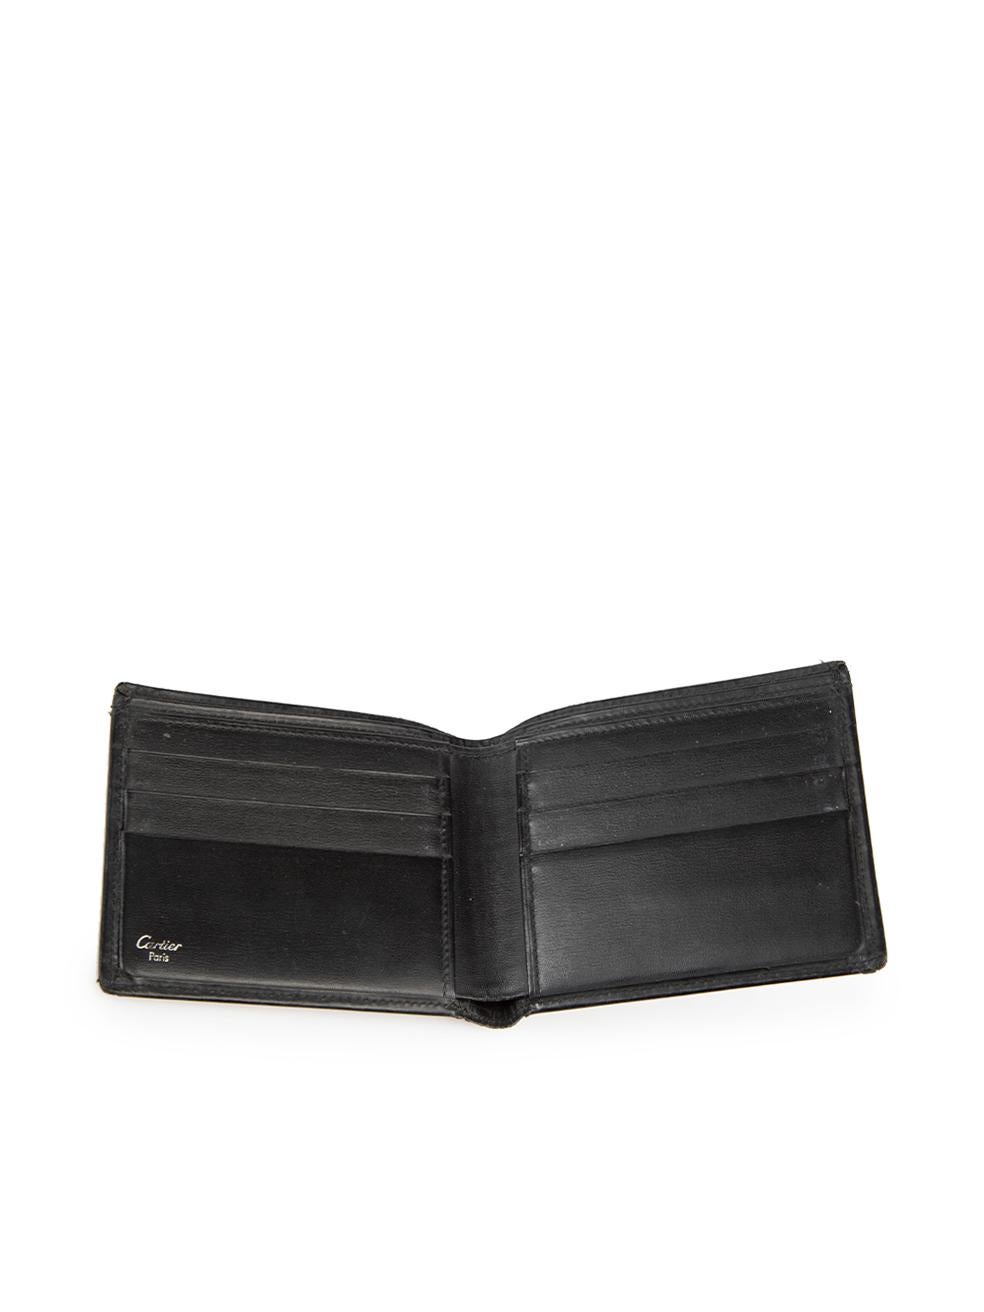 Cartier Black Leather Bifold Small Wallet 1